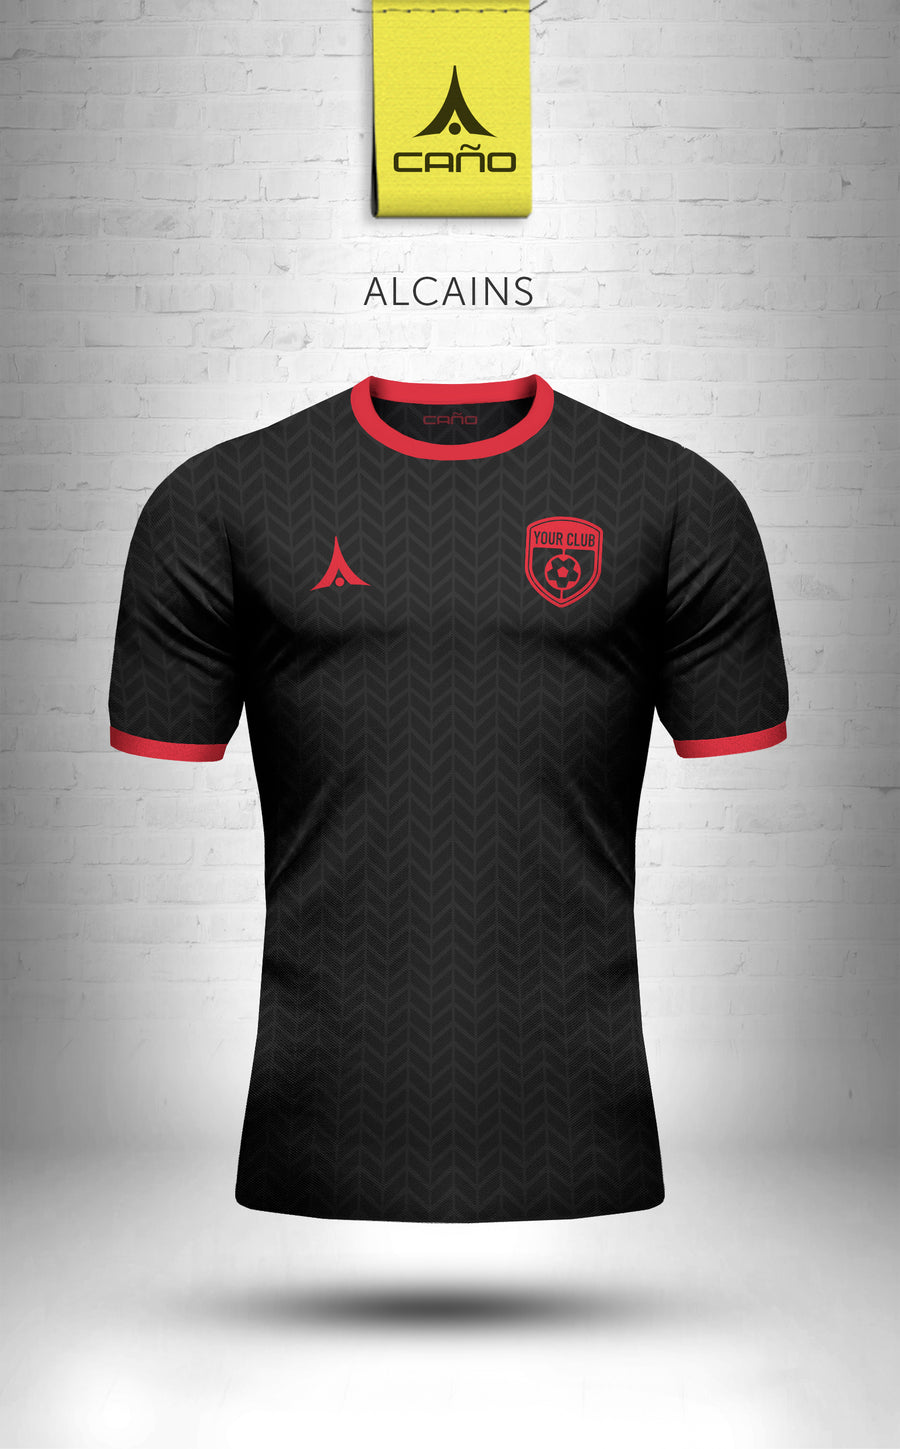 Alcains in black/red